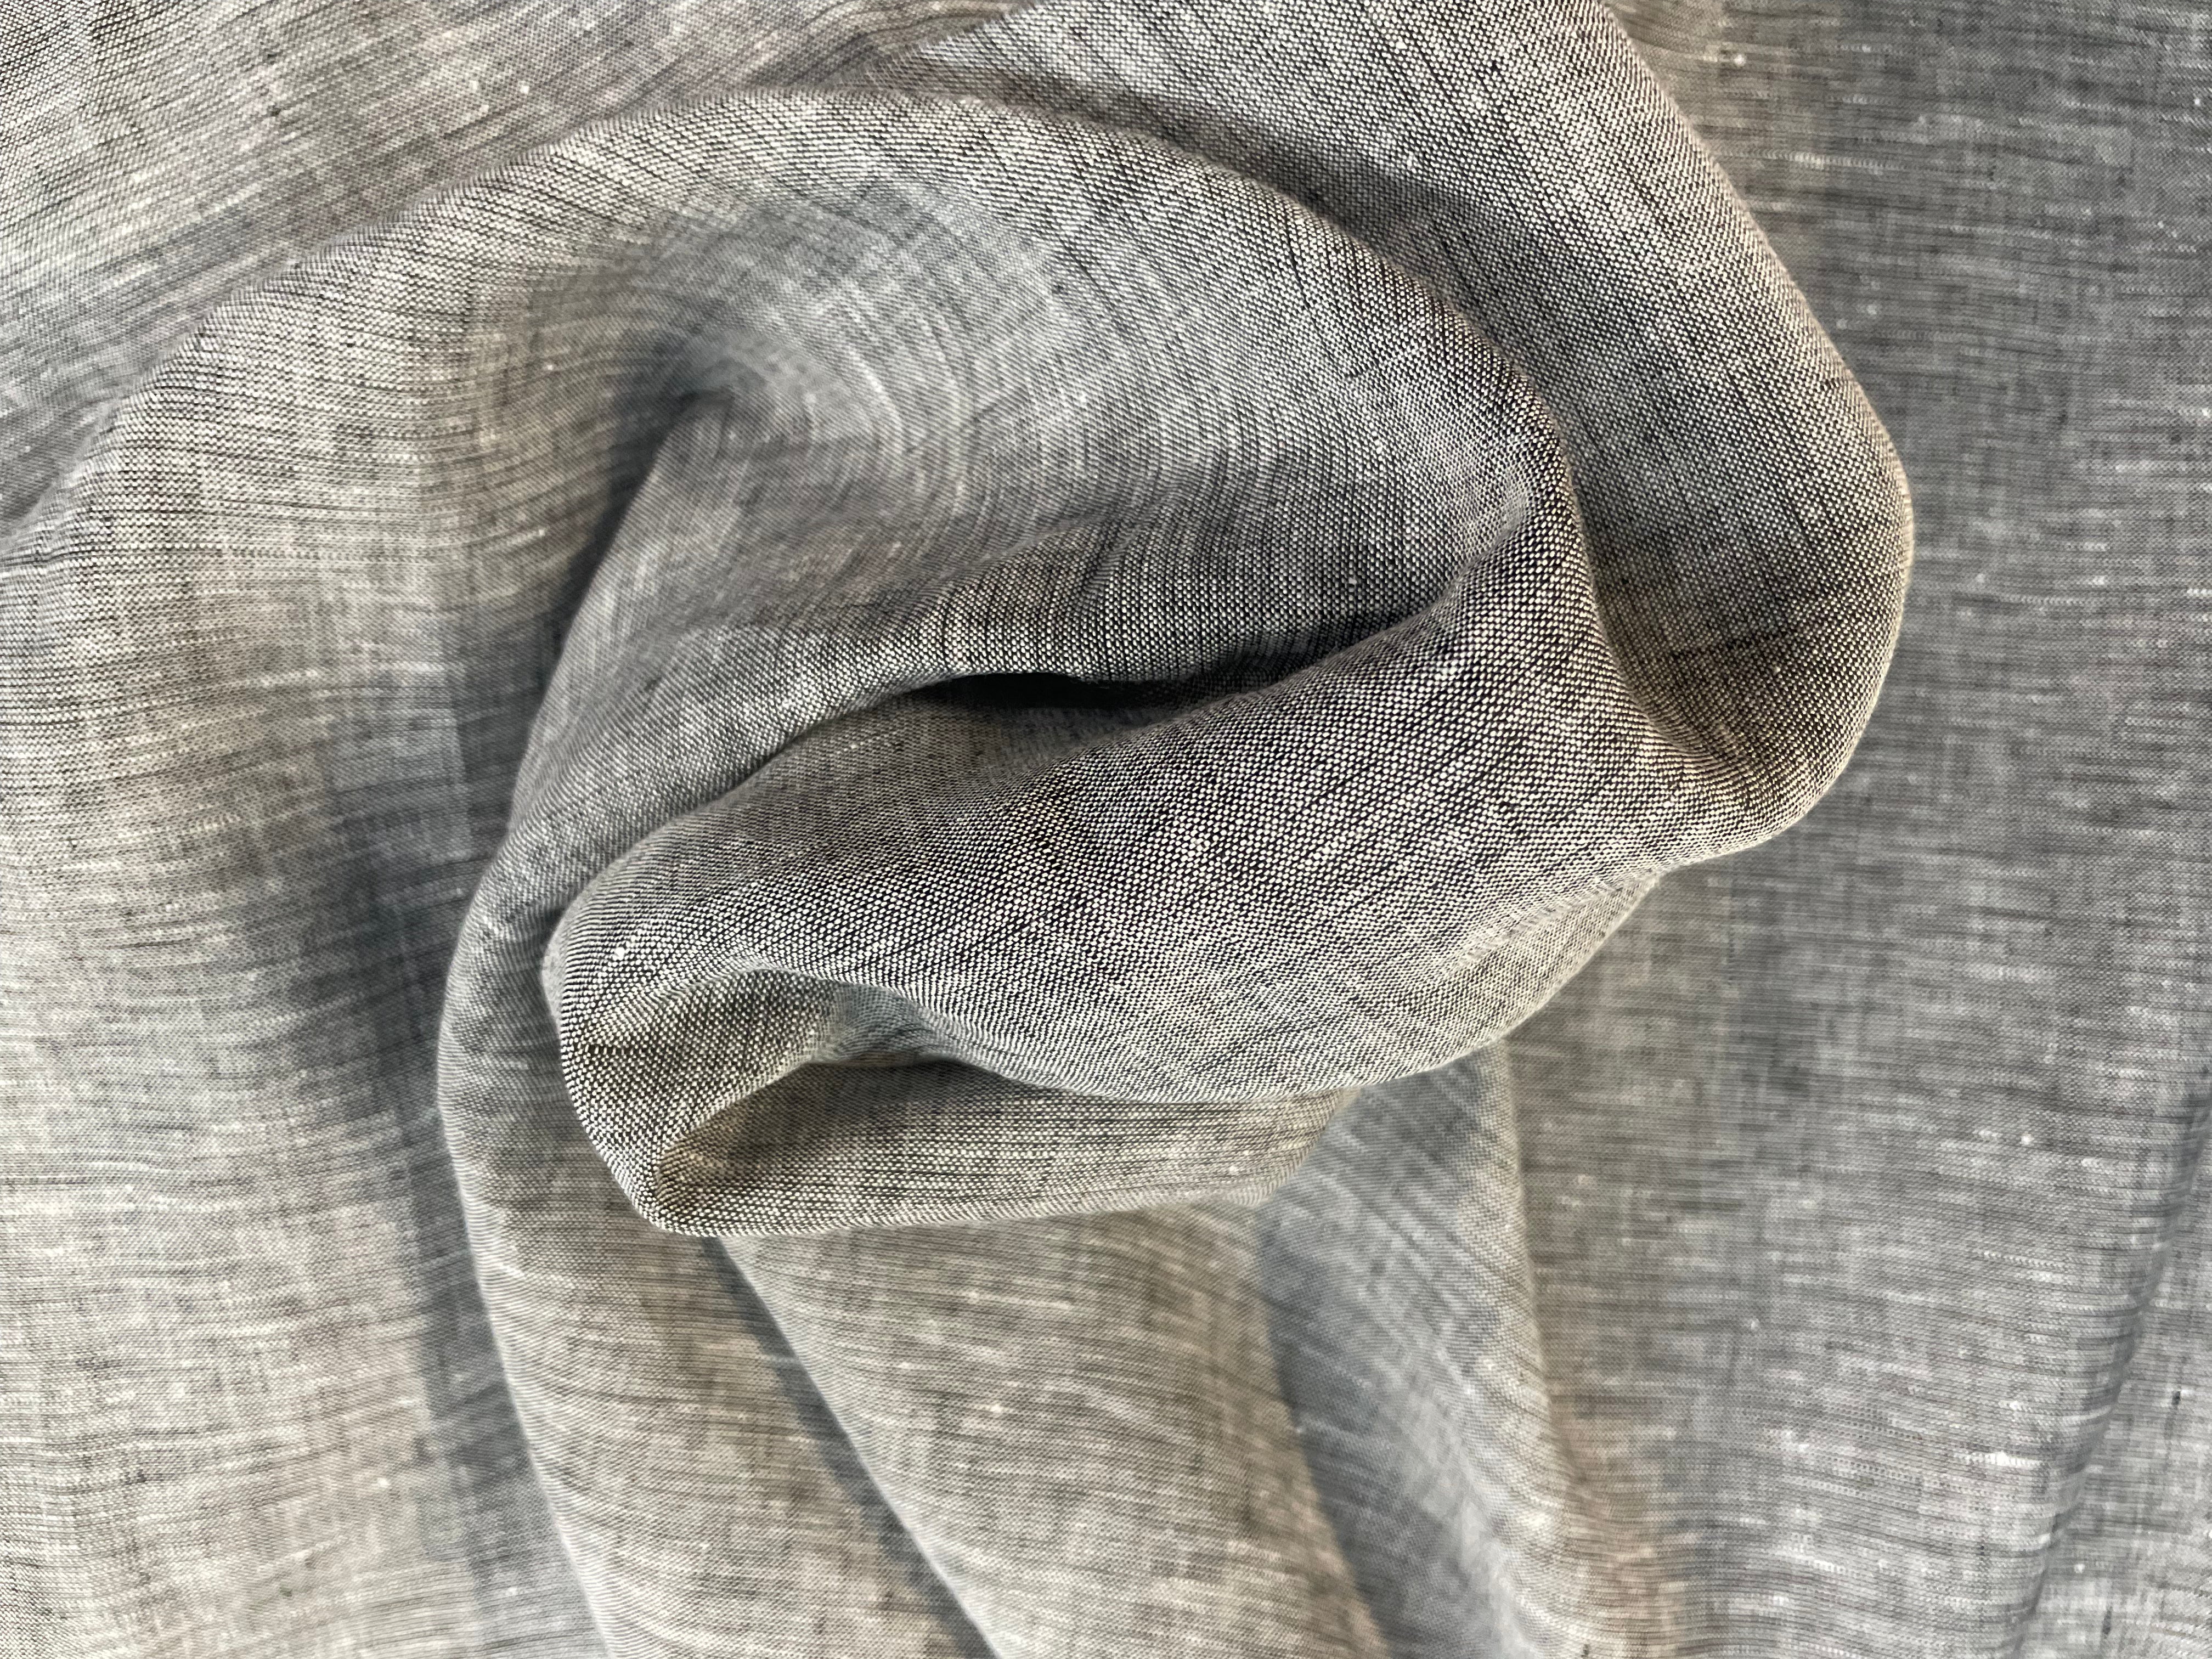 Denim Fabric For Sale by the Yard – metrotextilesnyc